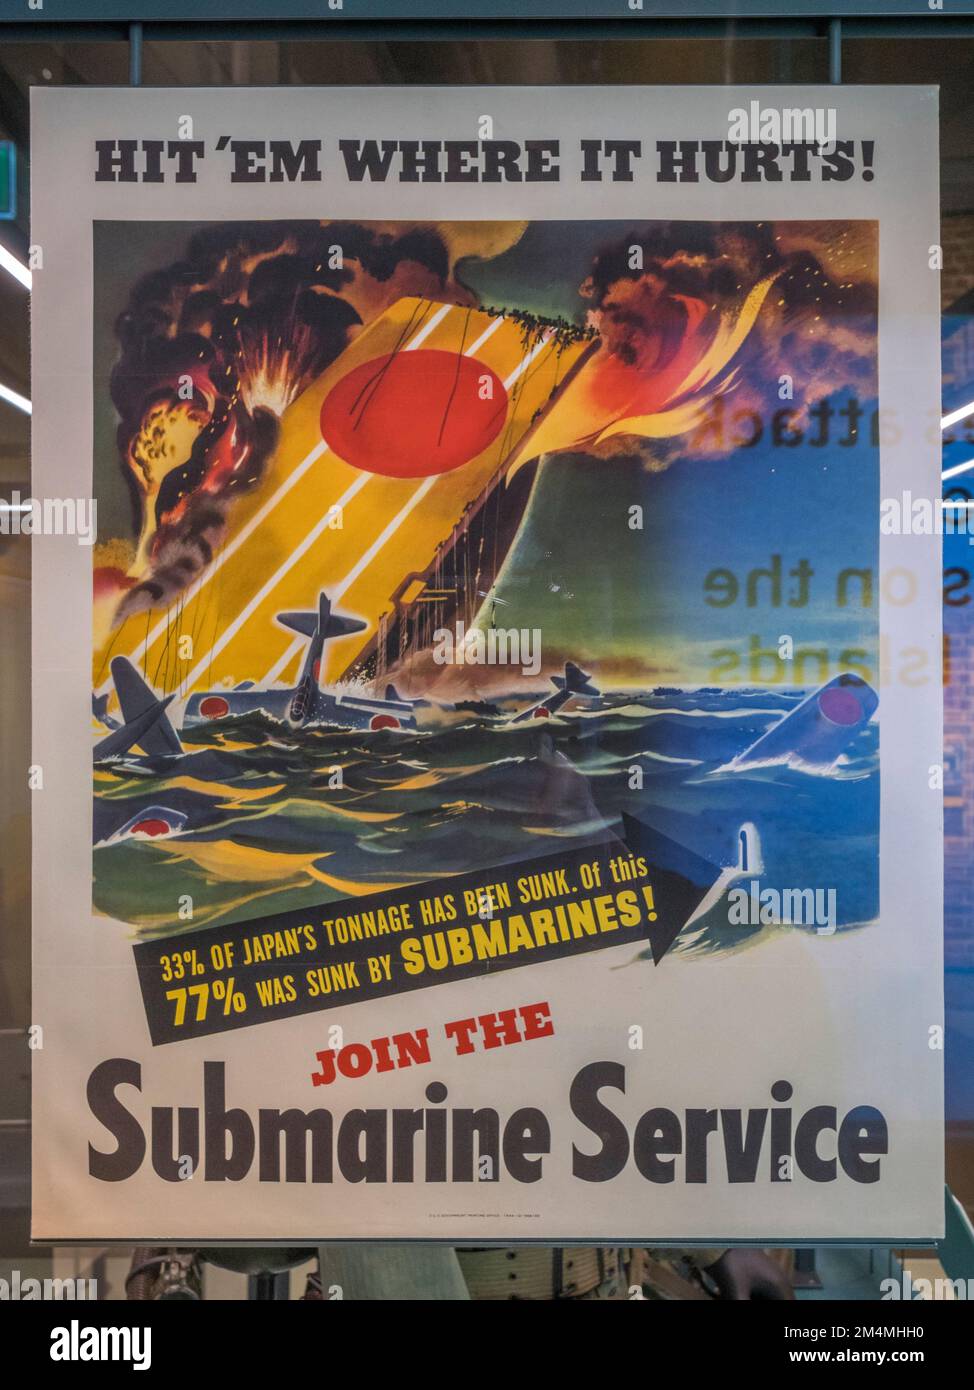 A US Submarine Service propaganda poster showing the Japanese economy collapsing under US merchant navy pressure, Imperial War Museum, London, UK. Stock Photo